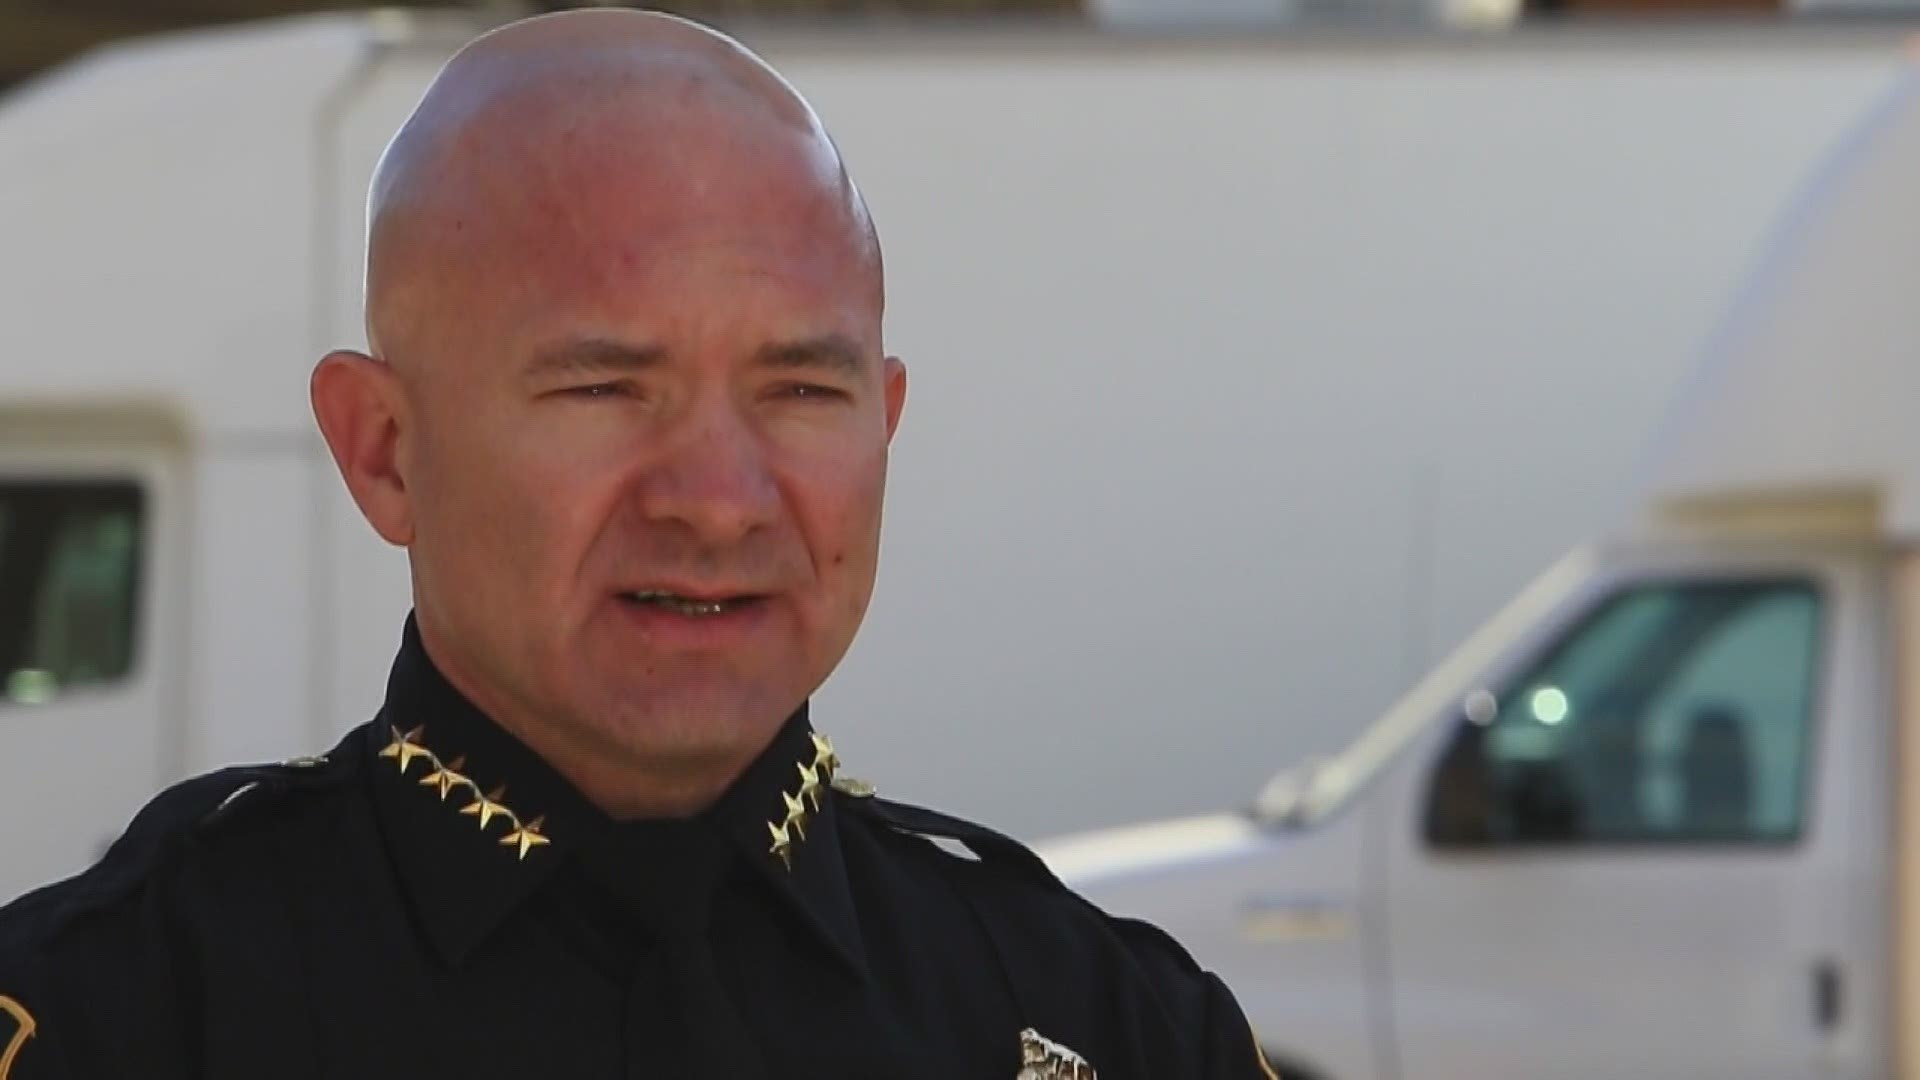 Chief Neil Noakes worked his way up the ranks to become the city's top cop. He plans on focusing on fighting violent crime, boosting morale and community relations.